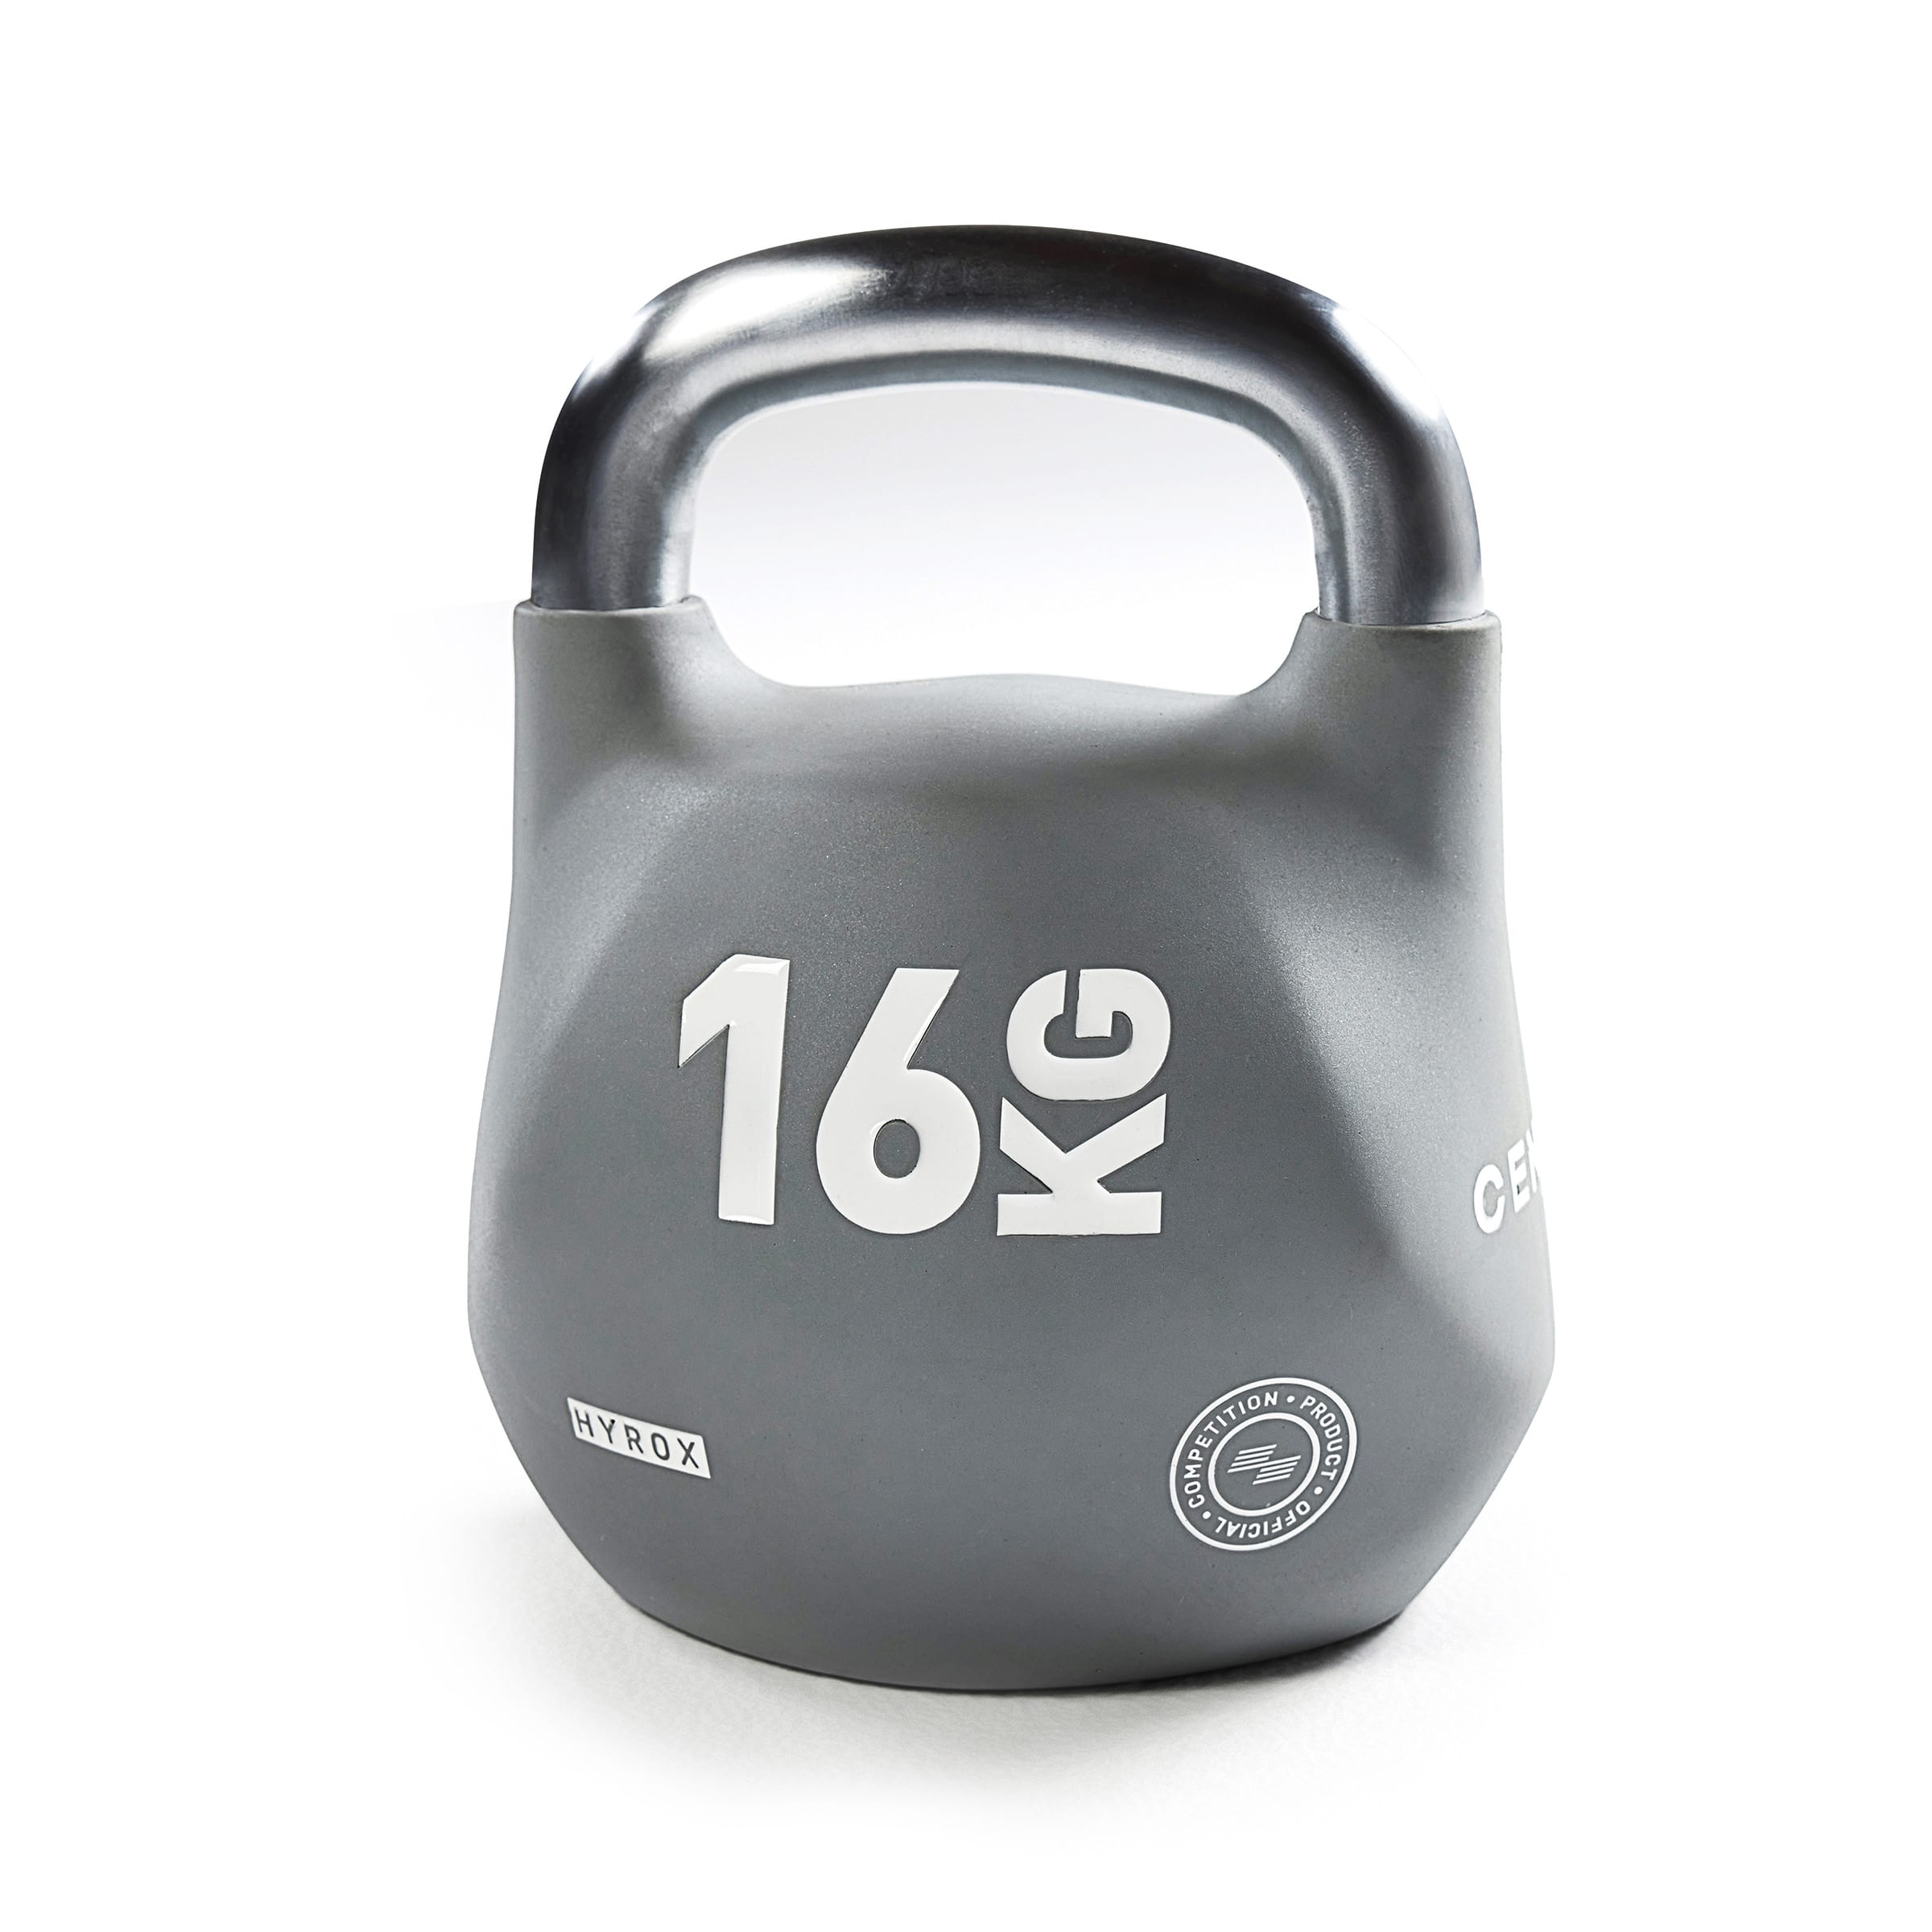 CENTR x HYROX Competition Octo Kettlebells